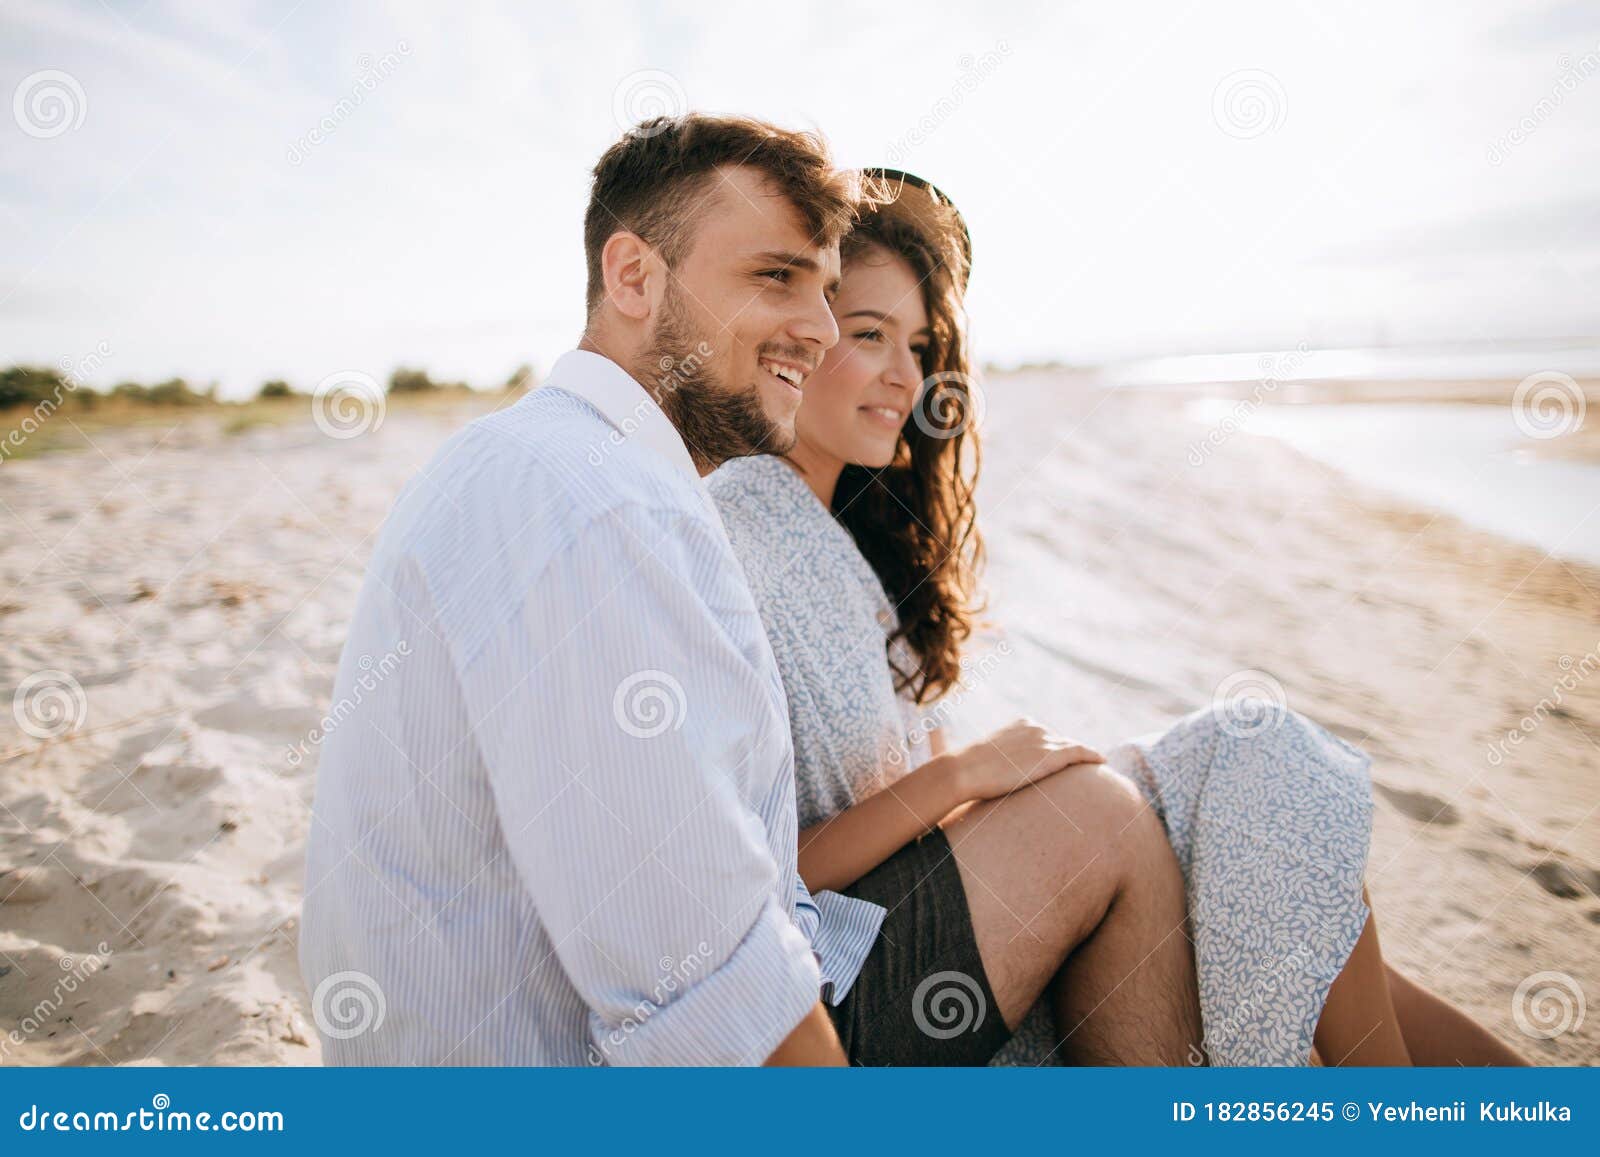 Summer Vacation On The Island. Young Couple In Love